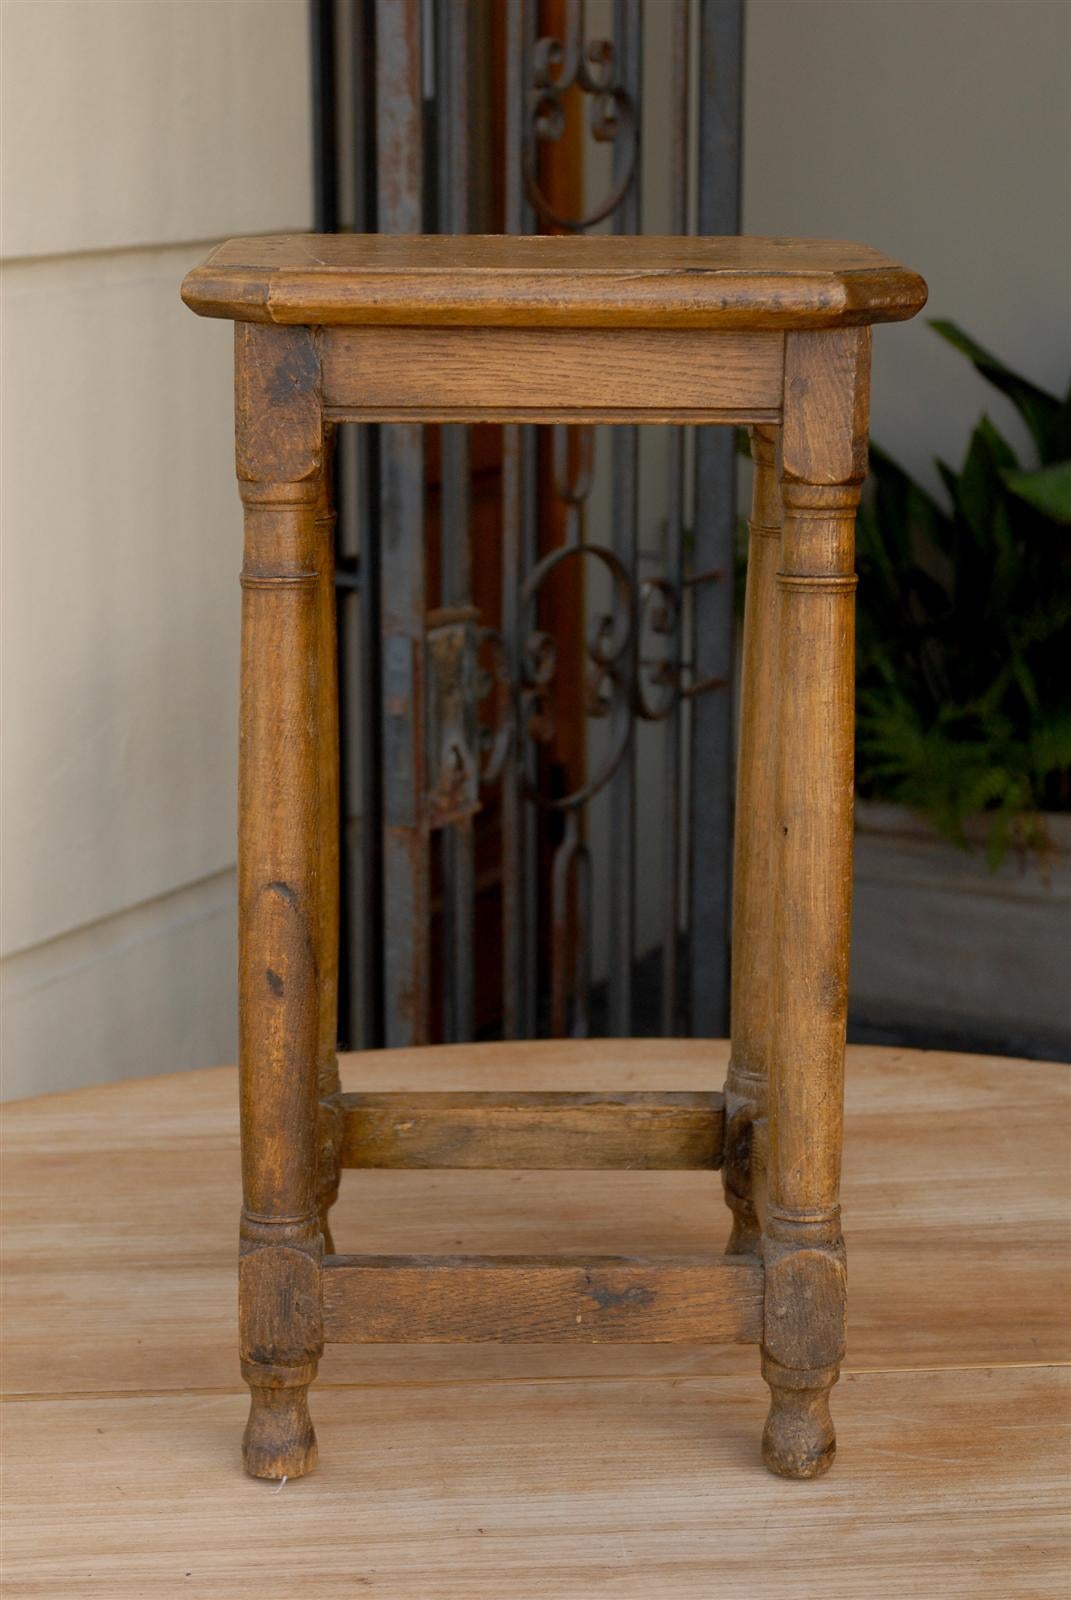 A four legged French stool from the late 19th century. This French stool or pedestal features a rectangular top with canted corners supported by four slightly slanted legs. The nicely shaped legs, with tops reminiscent of the simplicity of Doric